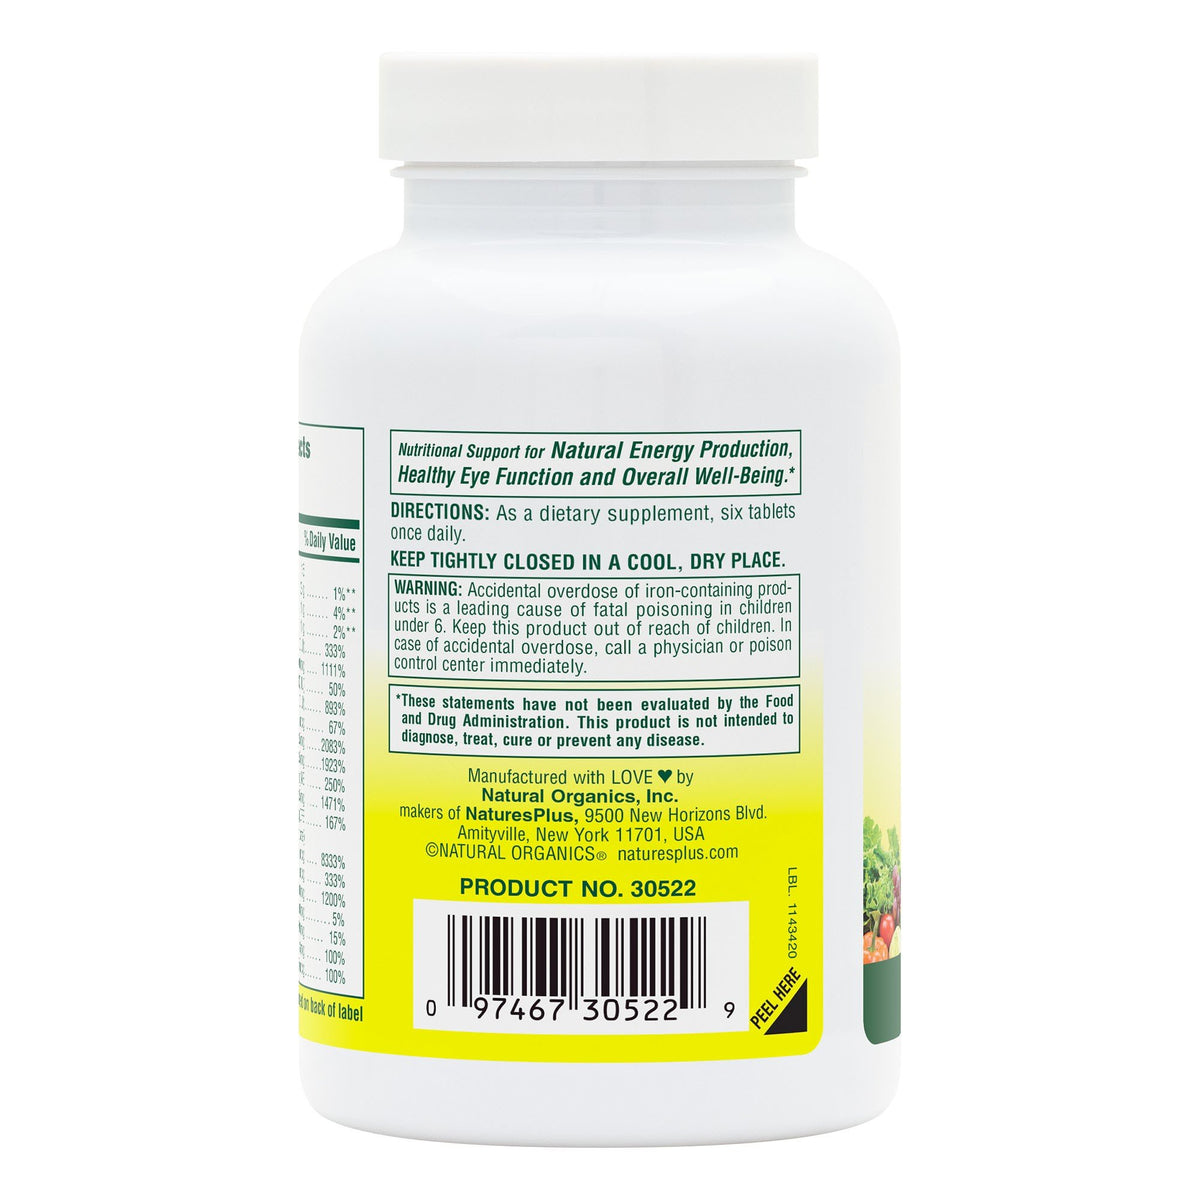 Nature&#39;s Plus Ultra Source of Life with Lutein Mini Tabs 180 Tablet